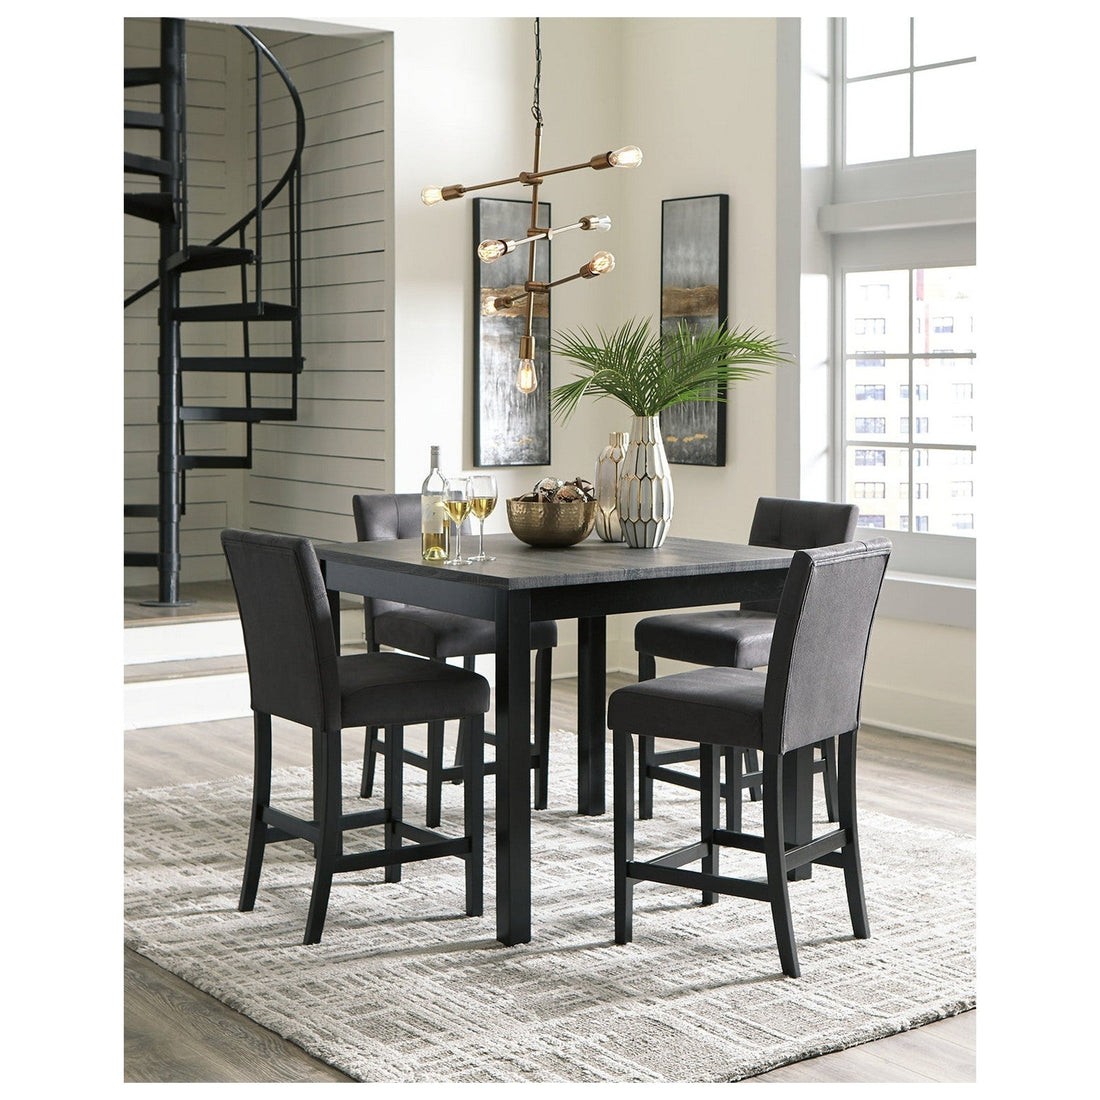 Garvine Counter Height Dining Table and Bar Stools (Set of 5) Ash-D161-223